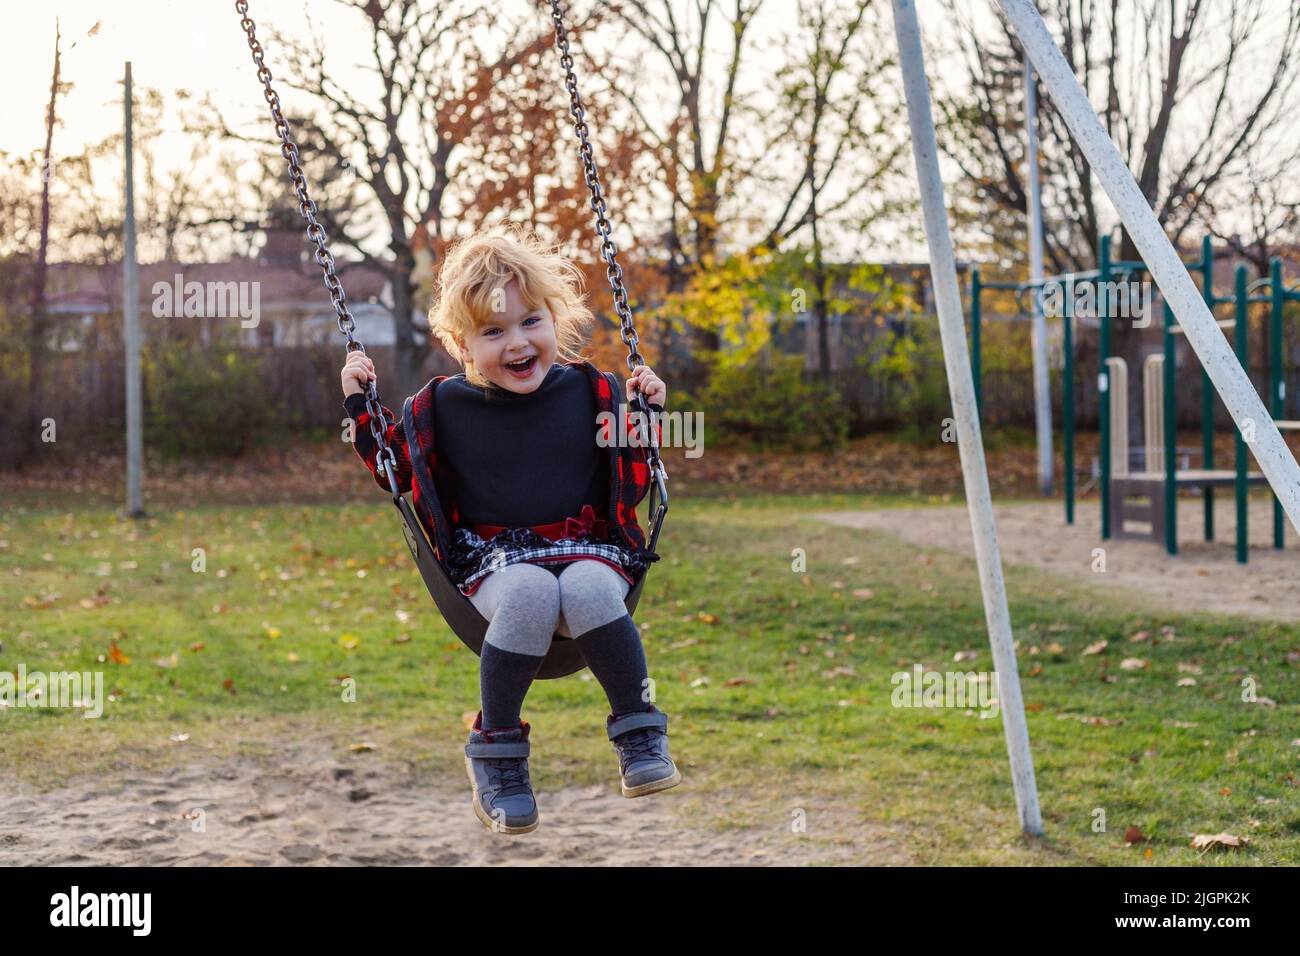 Smiling happy girl on swing in park in autumn. Girl at playground in fall season. Stock Photo